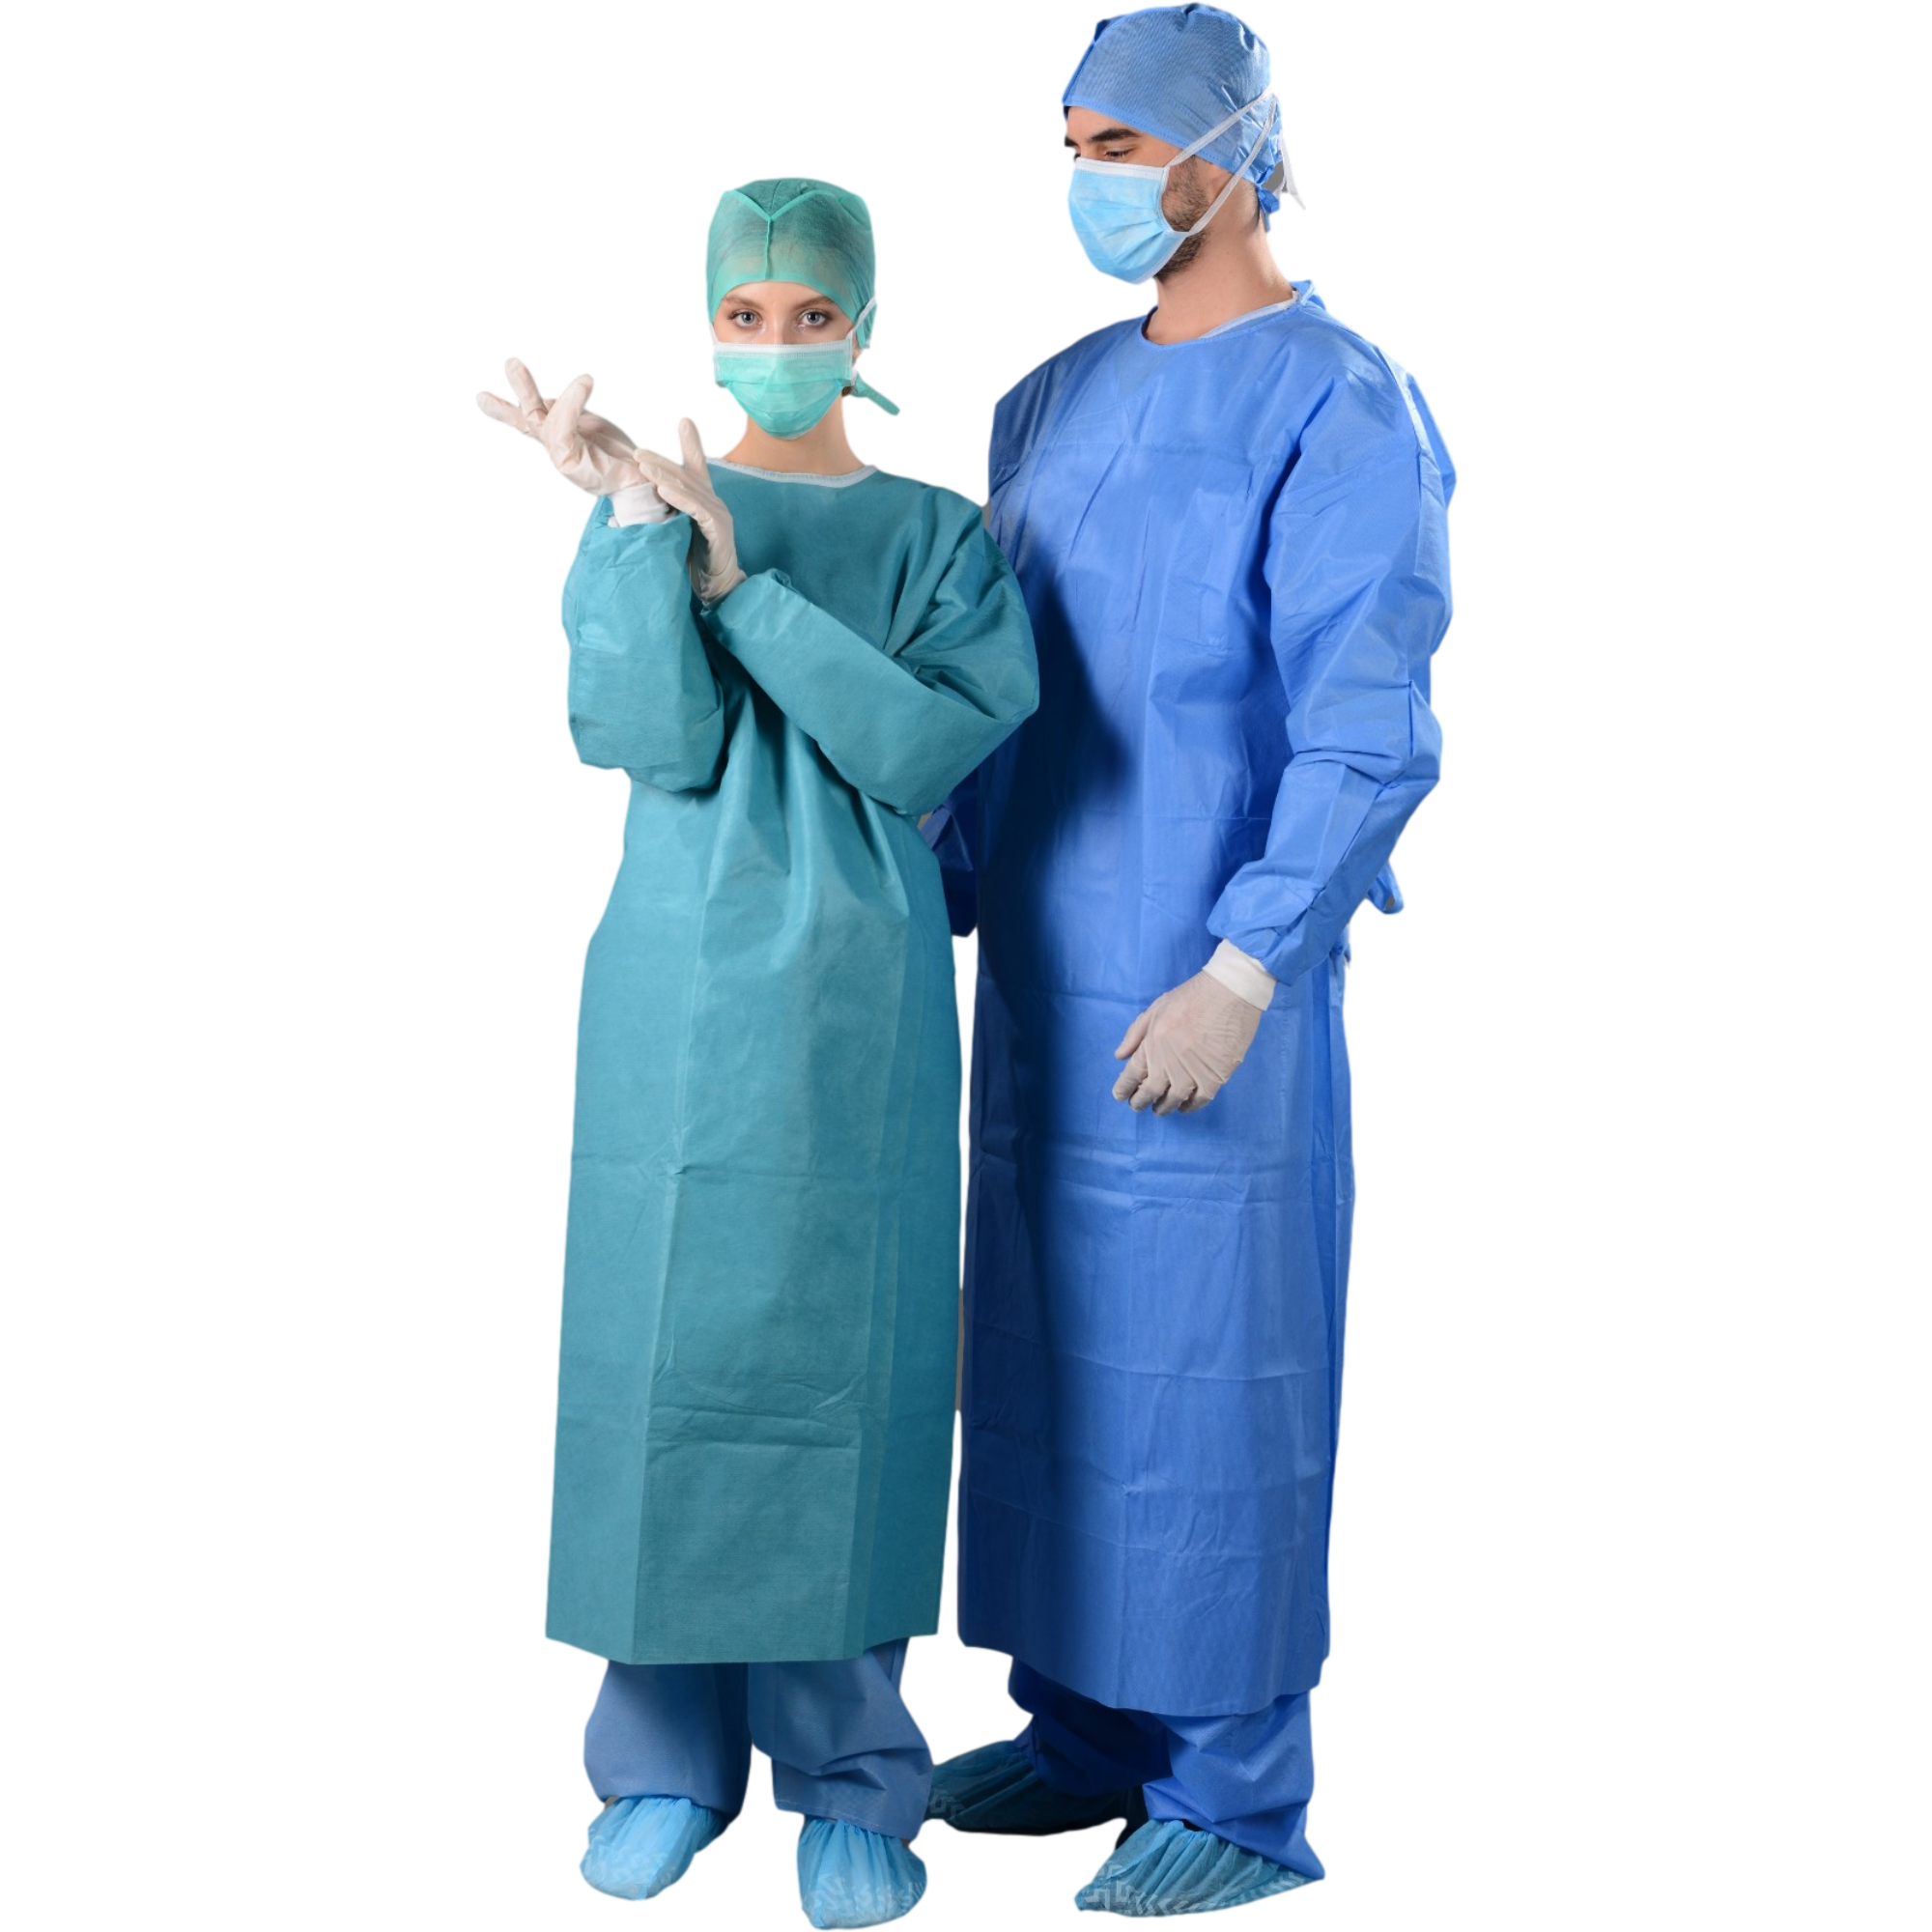 TOPMED surgical gown 